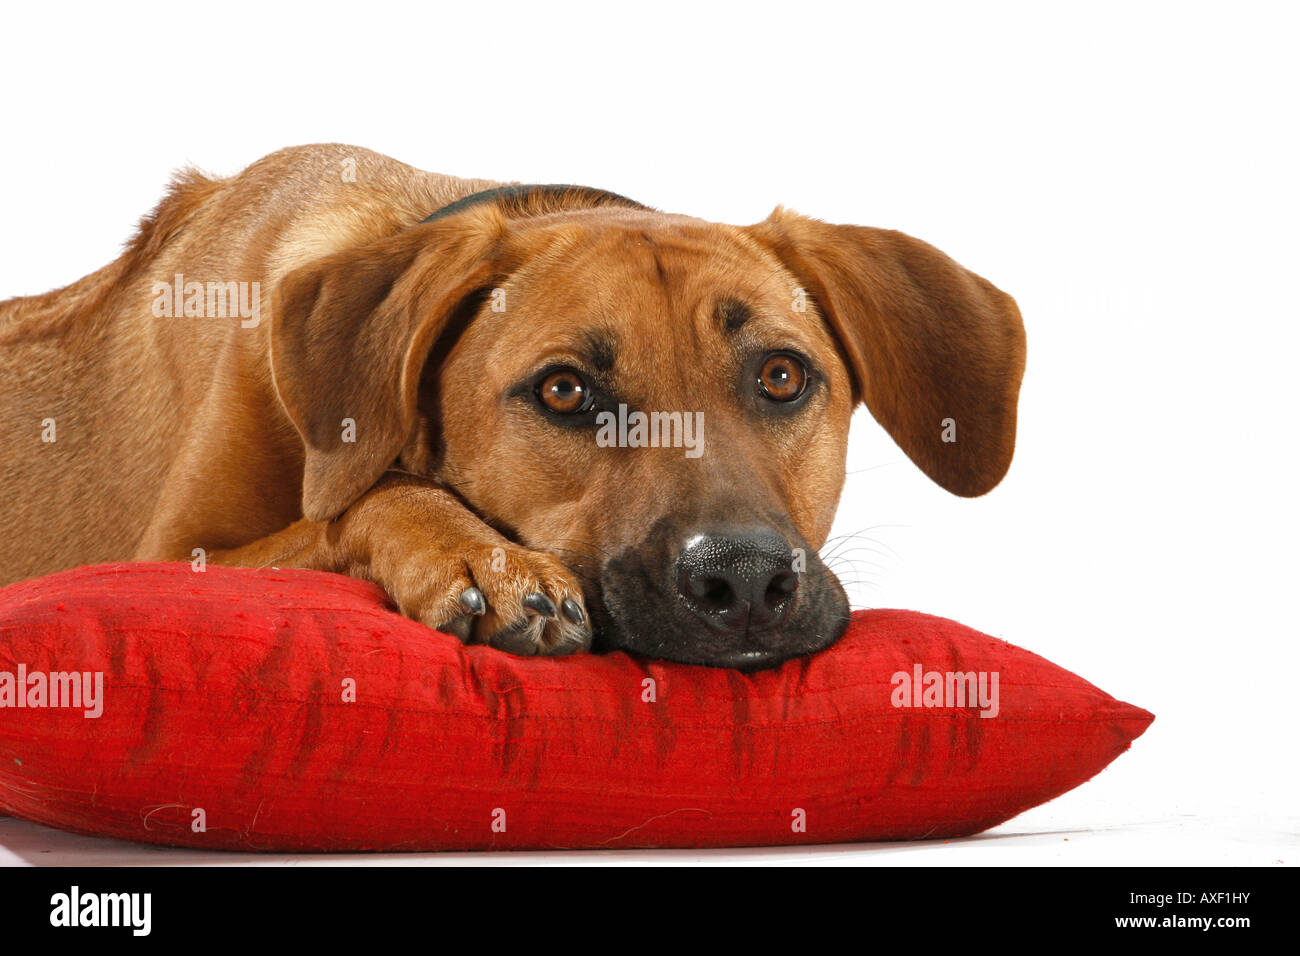 Half Breed dog - lying on pillow Banque D'Images